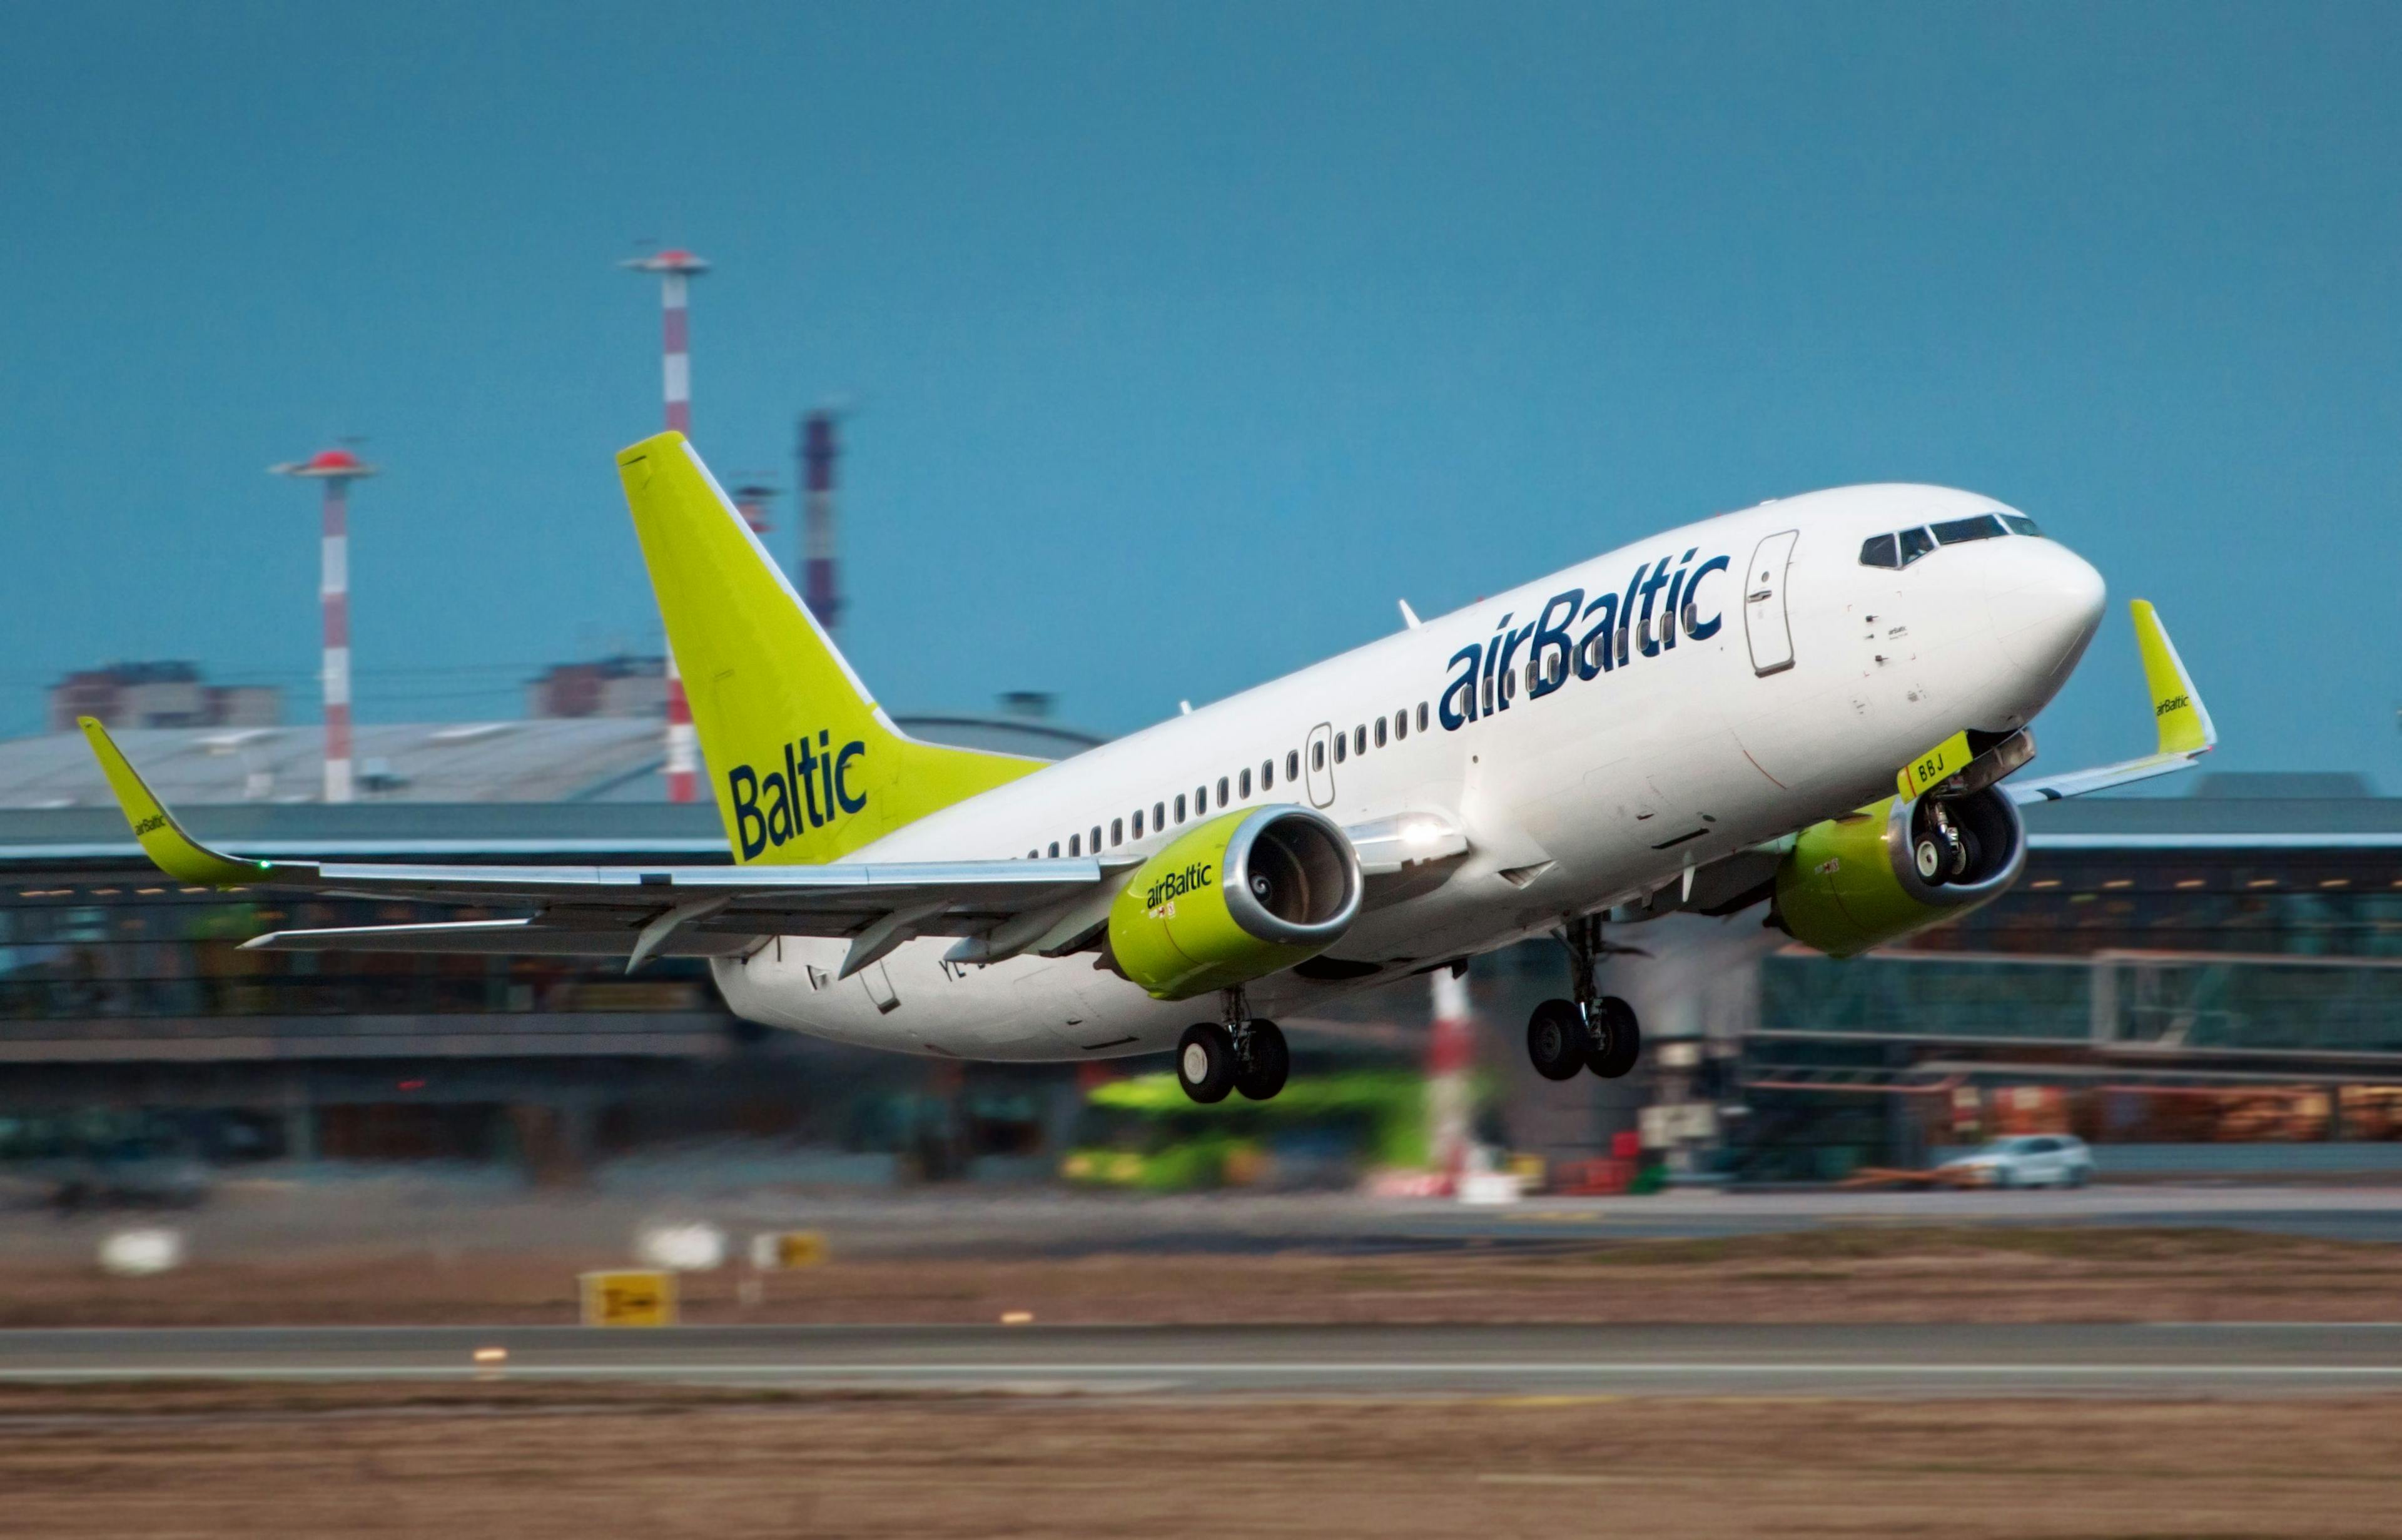 Europe’s Budget-Friendly Airlines You Need to Know - airBaltic airlines - low-budget airlines - ratepunk